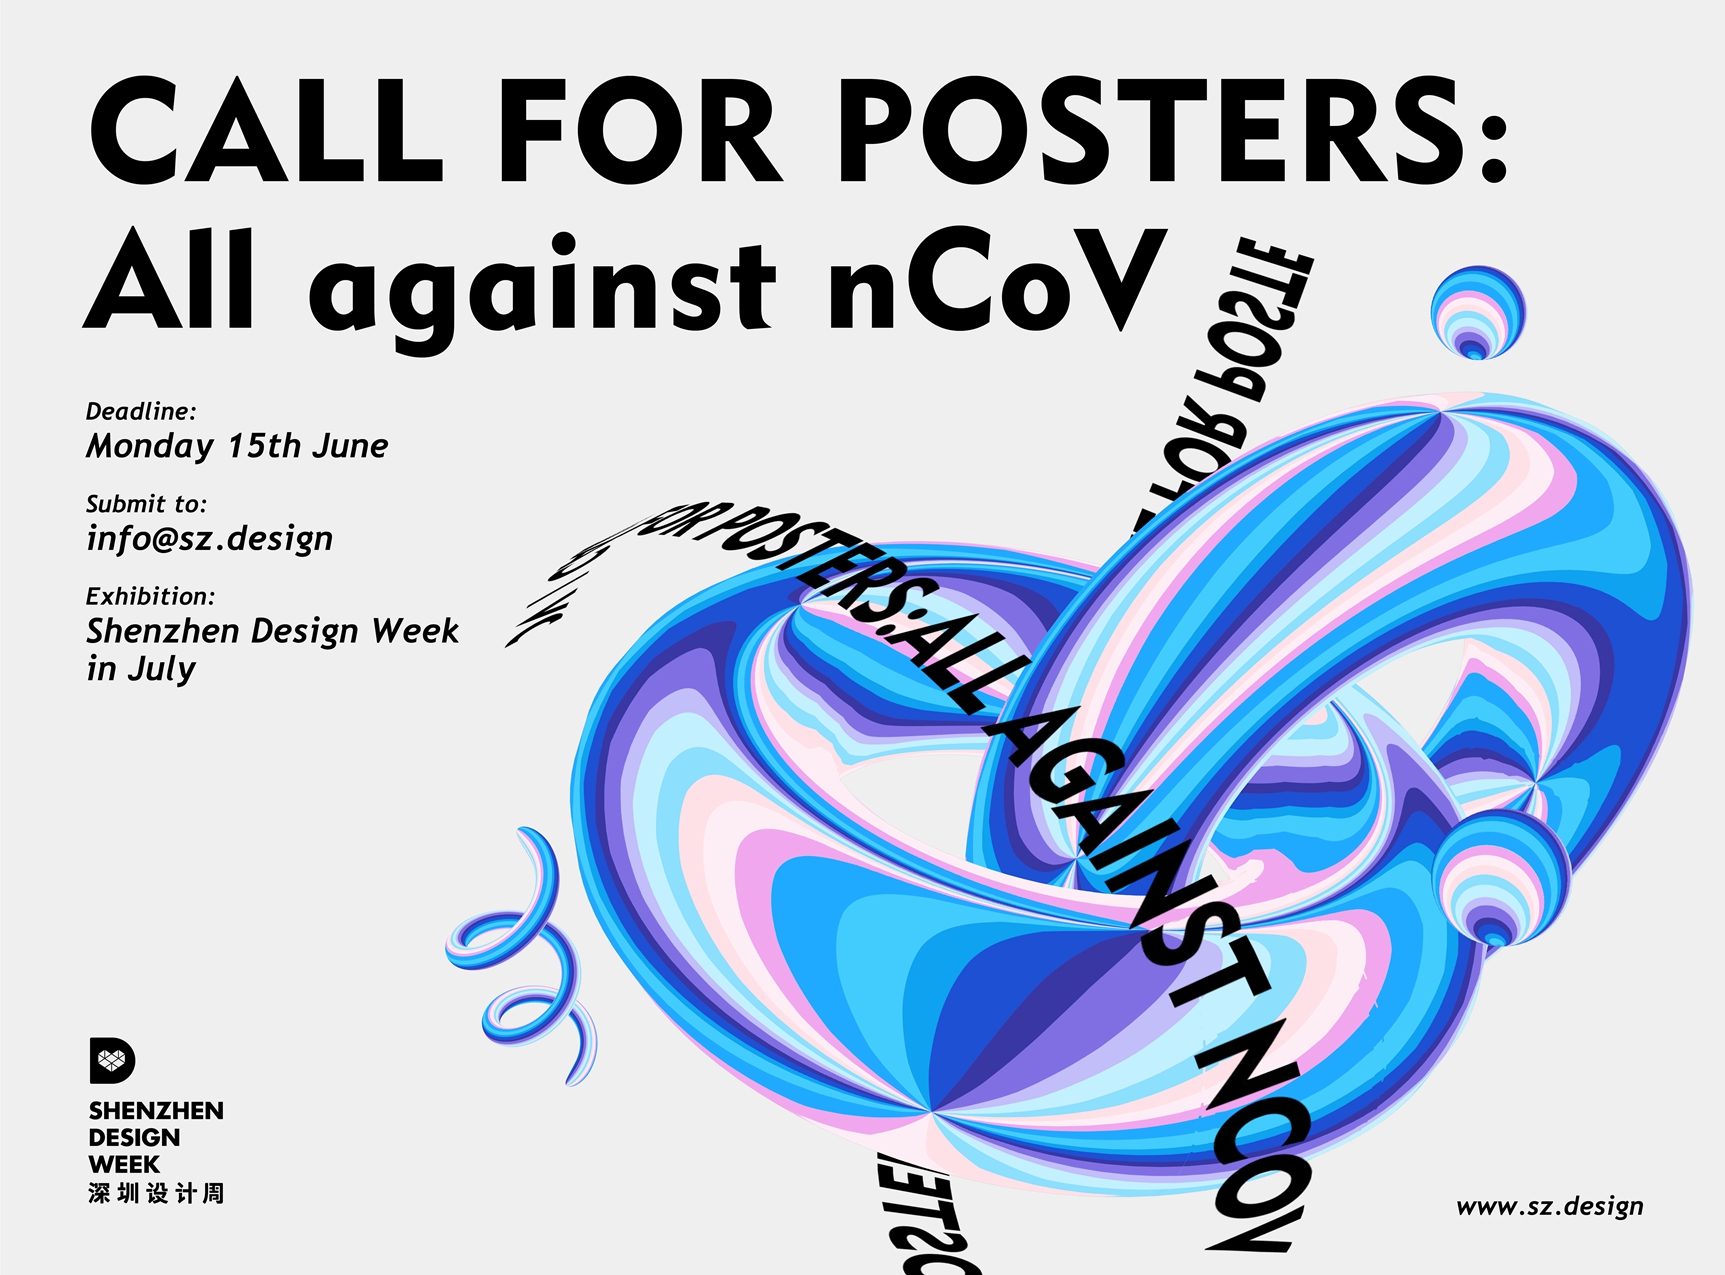 Call for posters: All Against nCoV